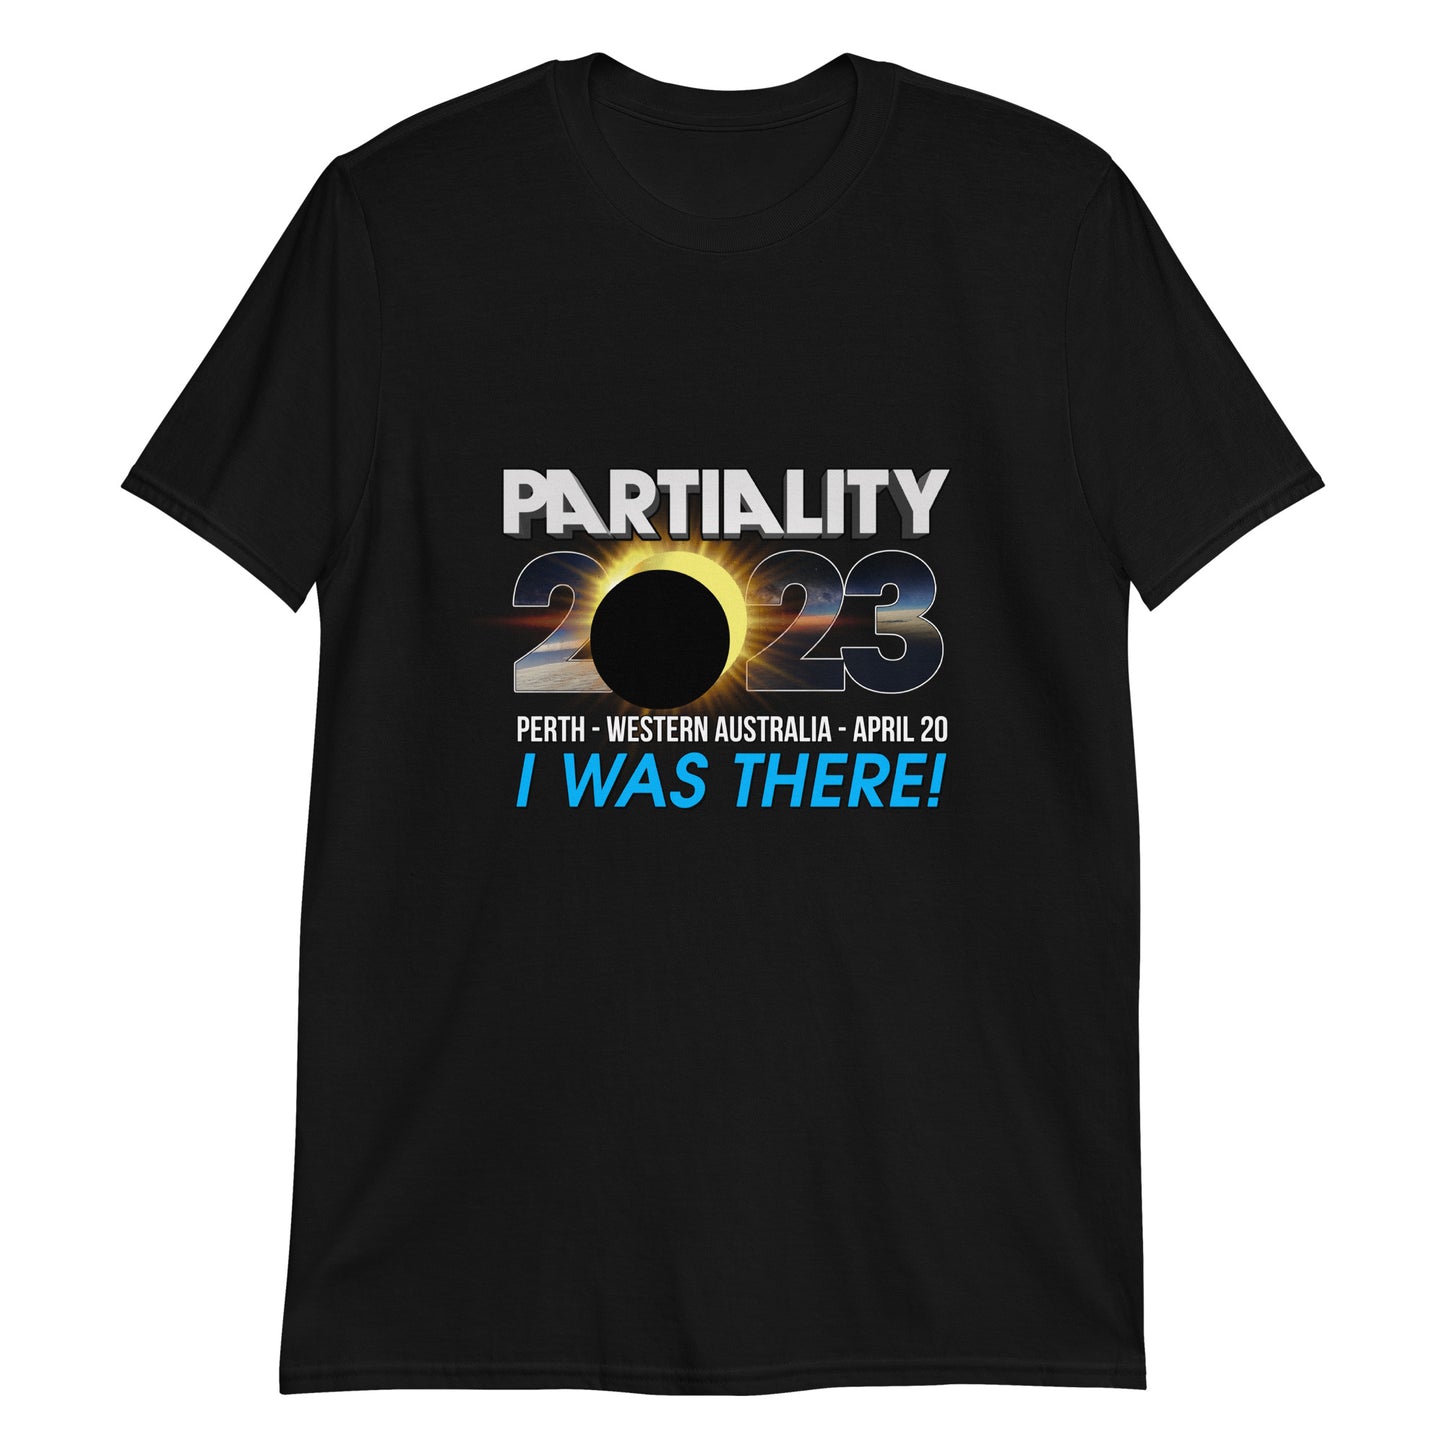 PARTIALITY 2023 - I Was There!